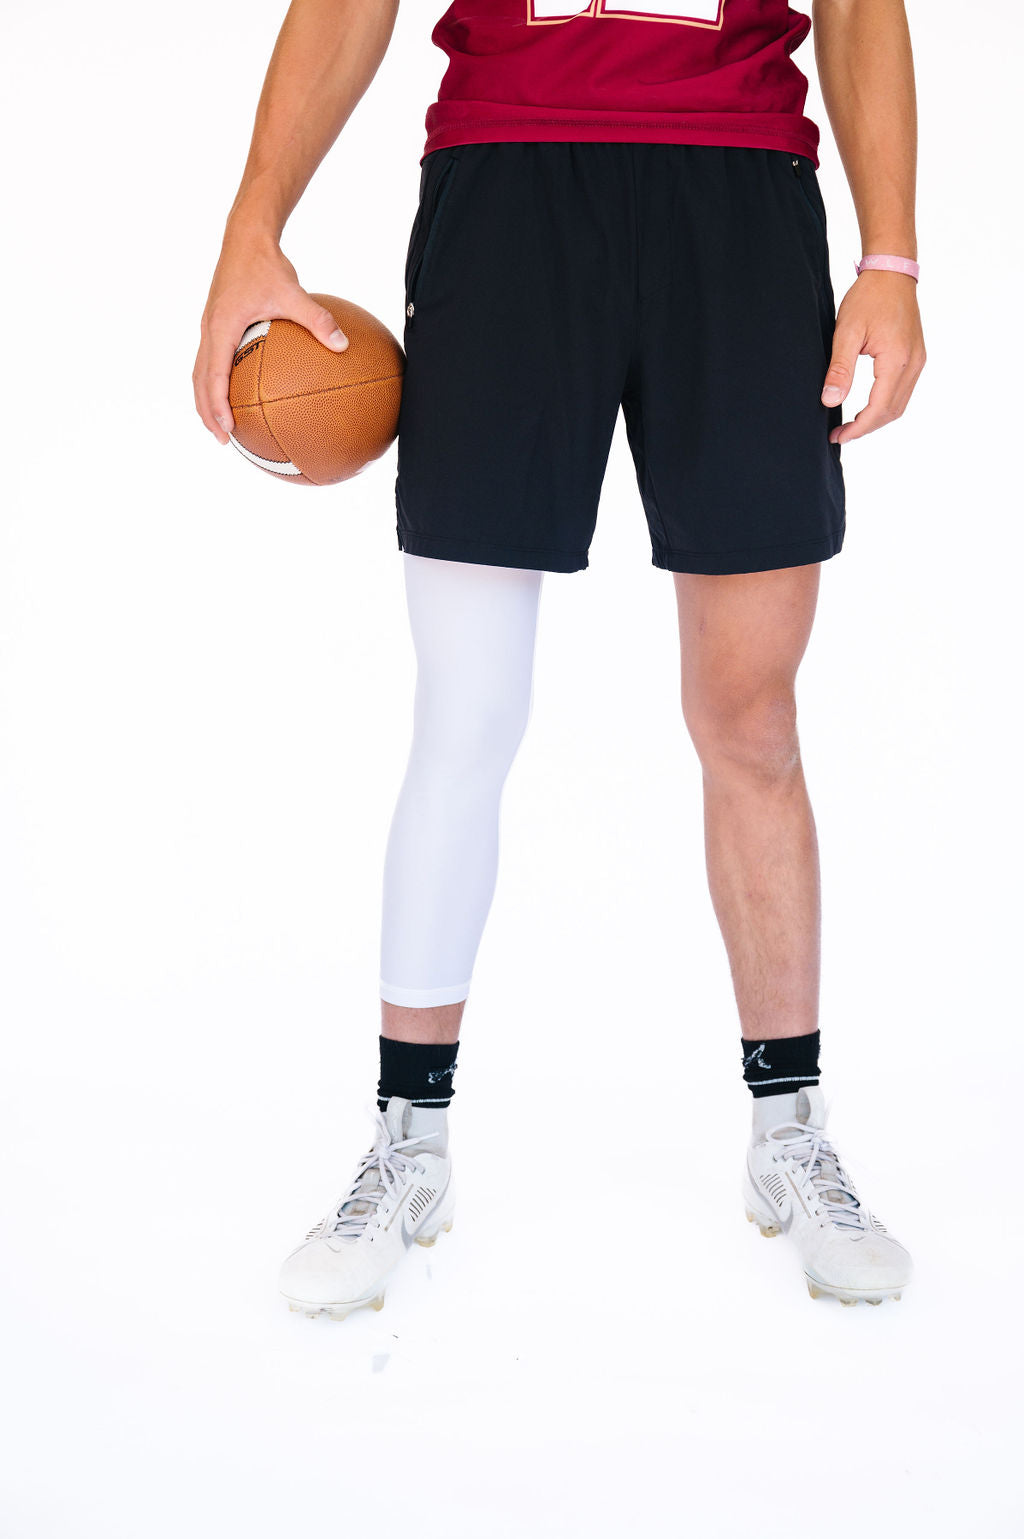 One Leg Compression Tights (Black) - For Basketball, Football & Lacrosse